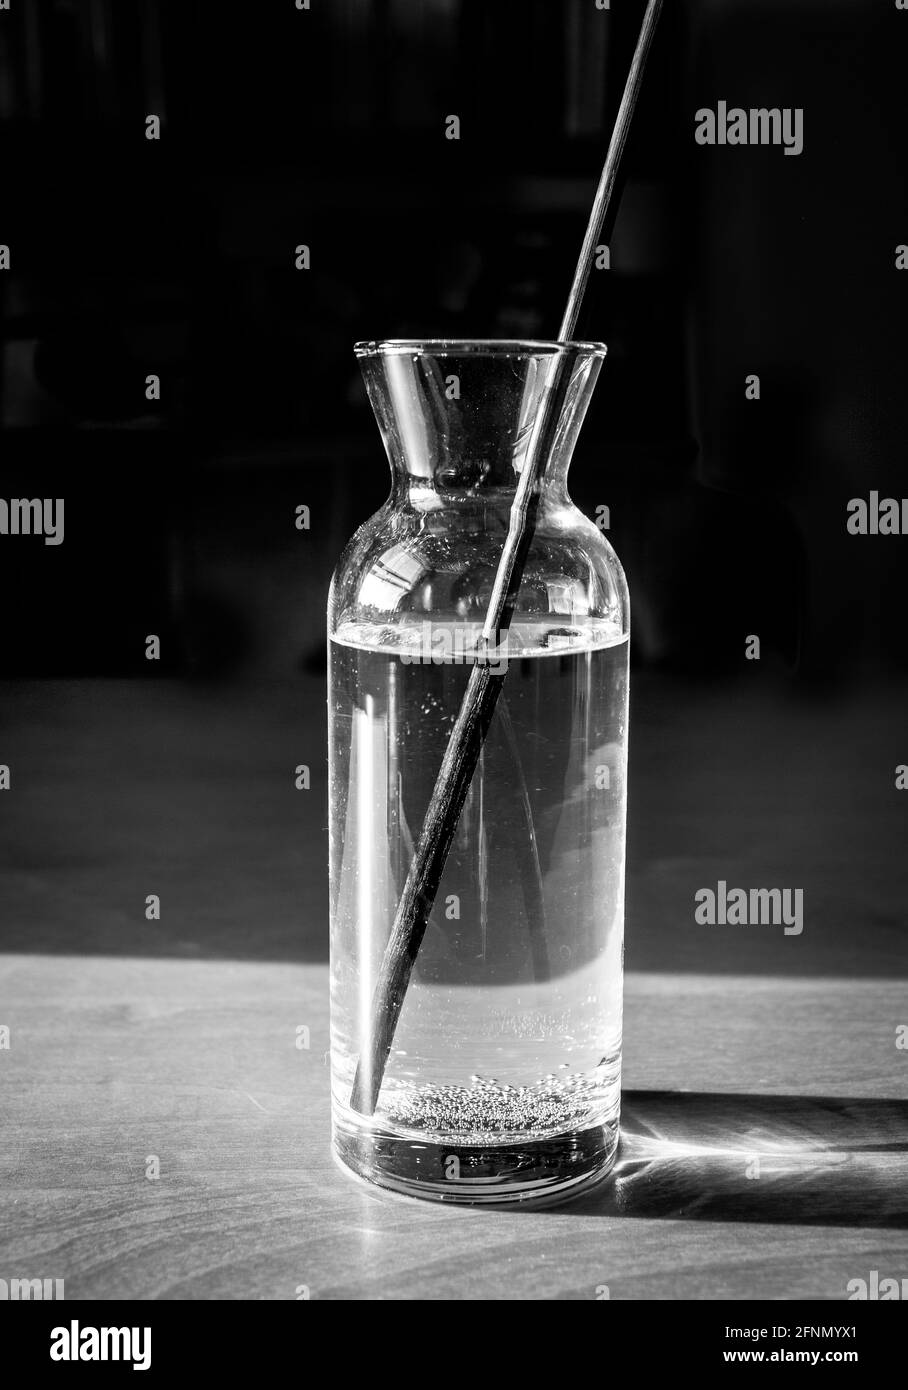 Glass vase Black and White Stock Photos & Images - Alamy